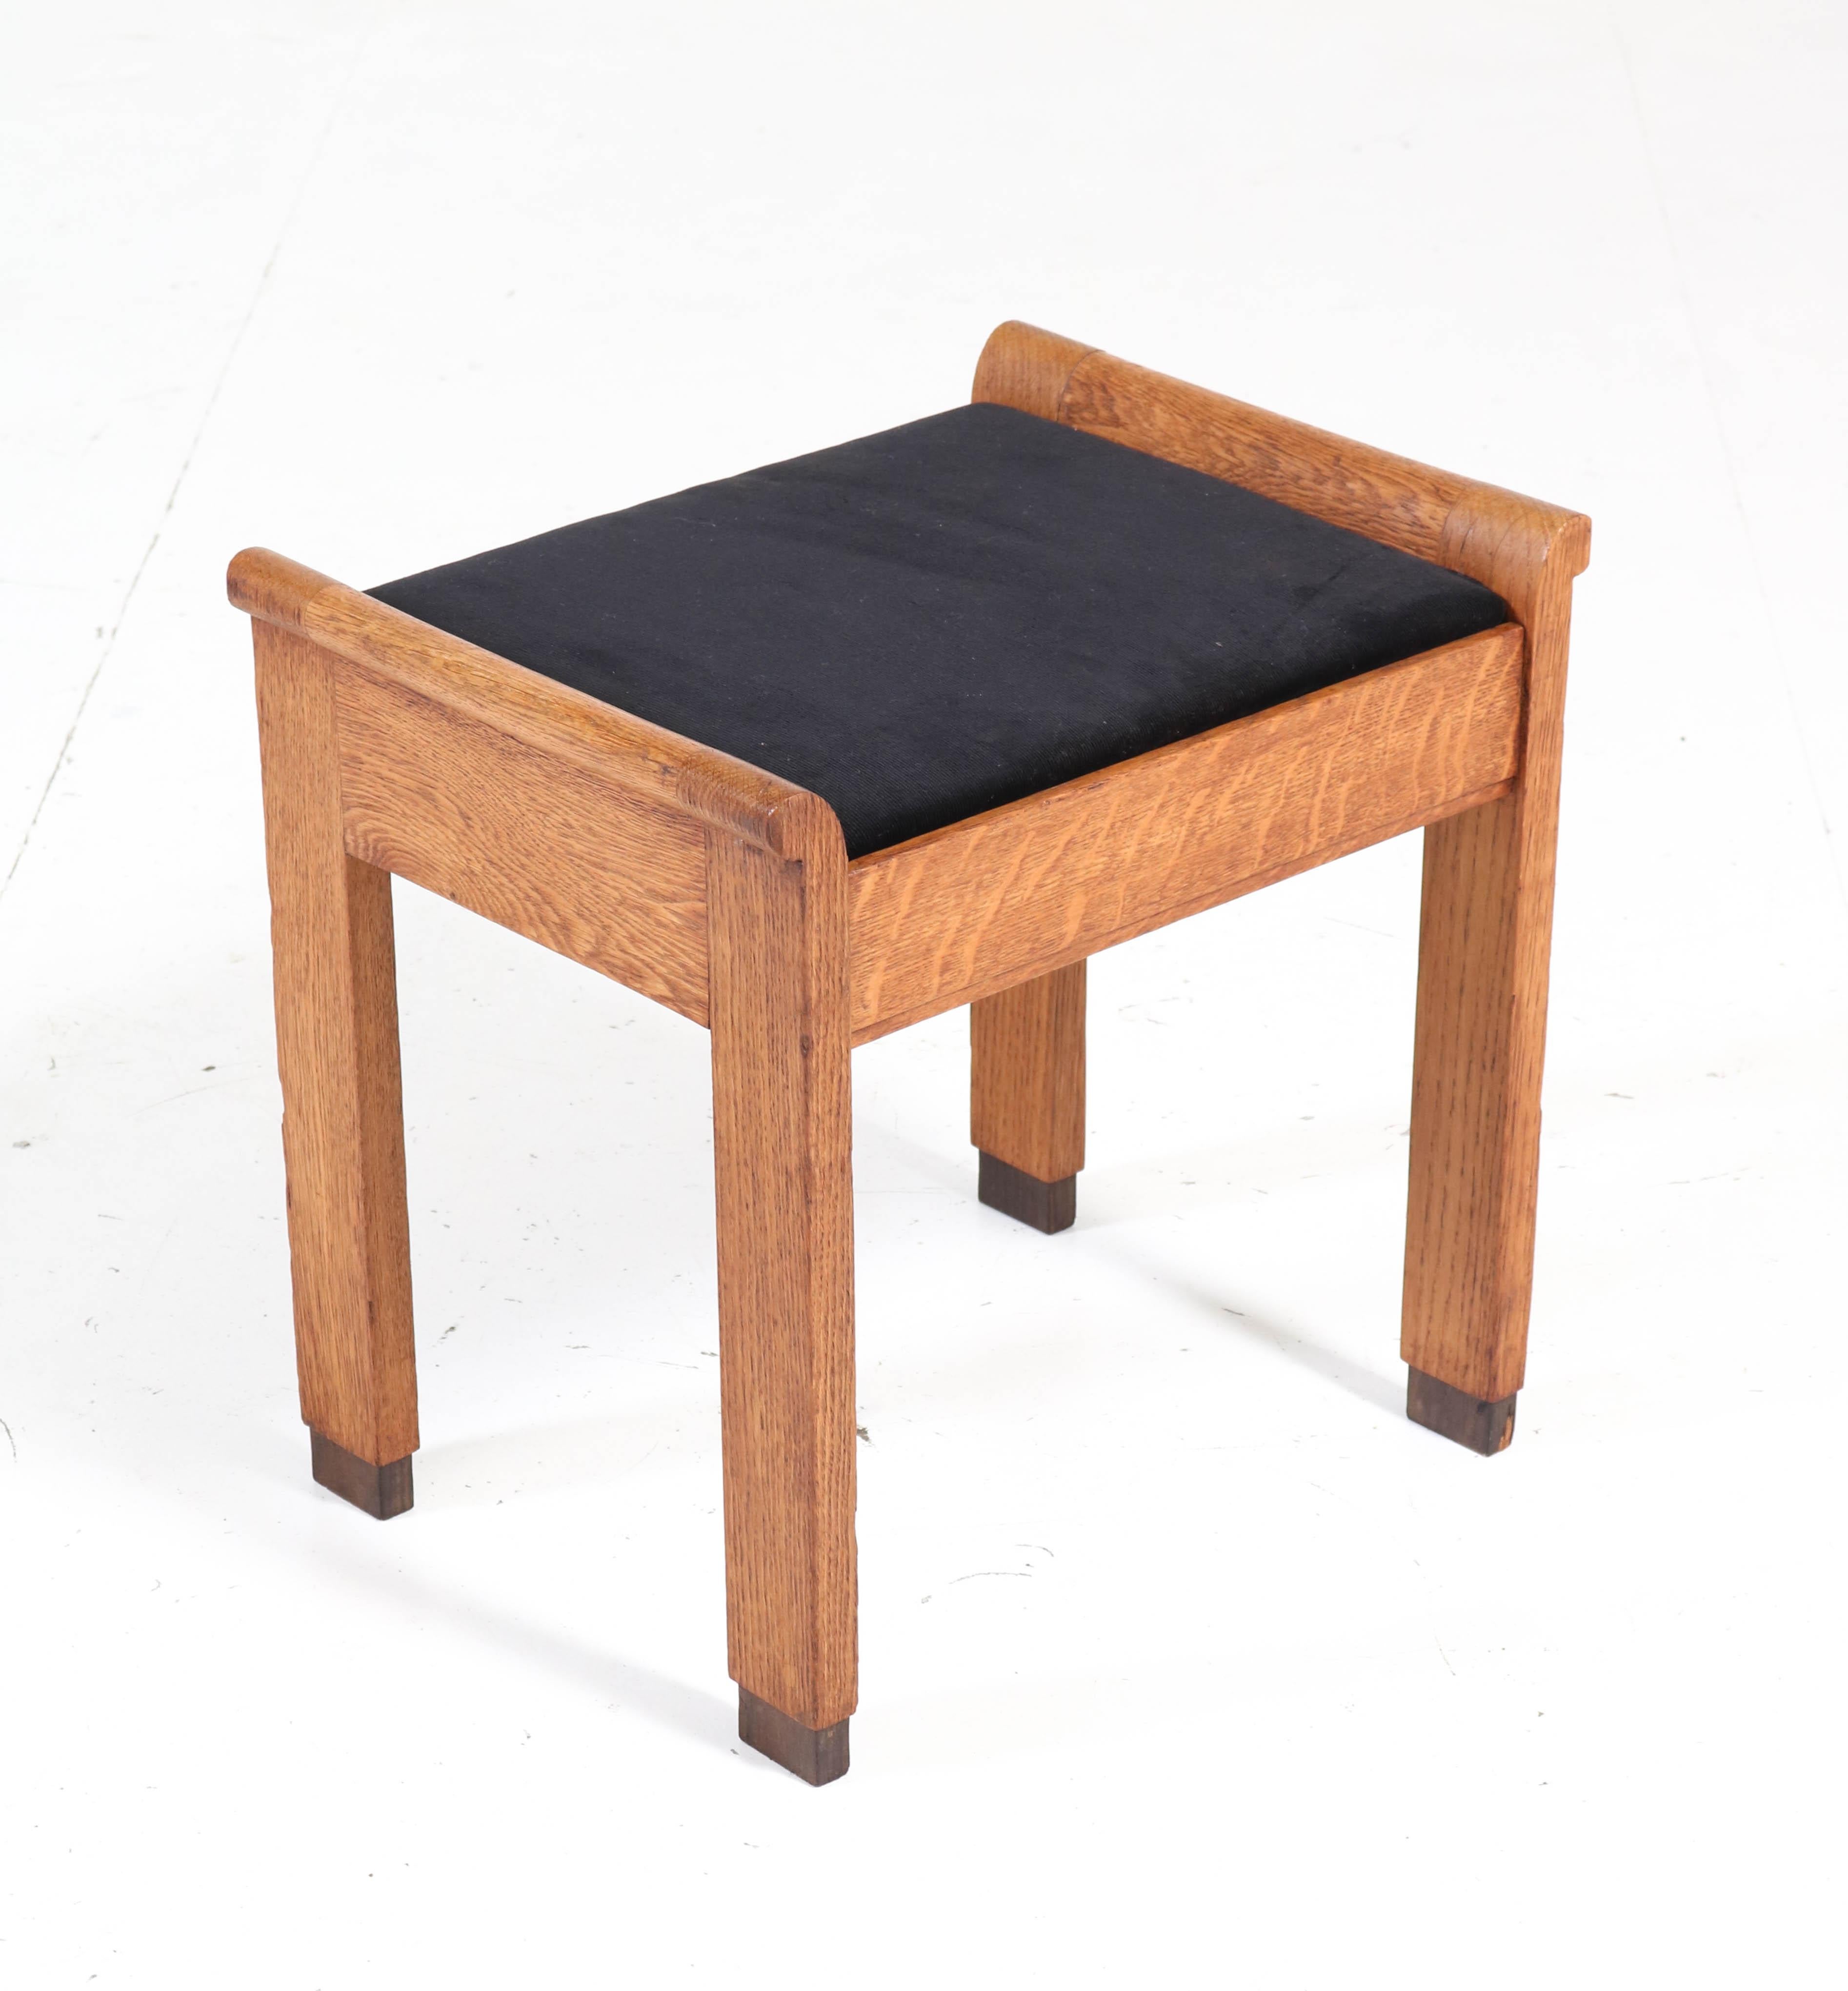 Early 20th Century Oak Art Deco Haagse School Stool by J.A. Muntendam for L.O.V. Oosterbeek, 1920s